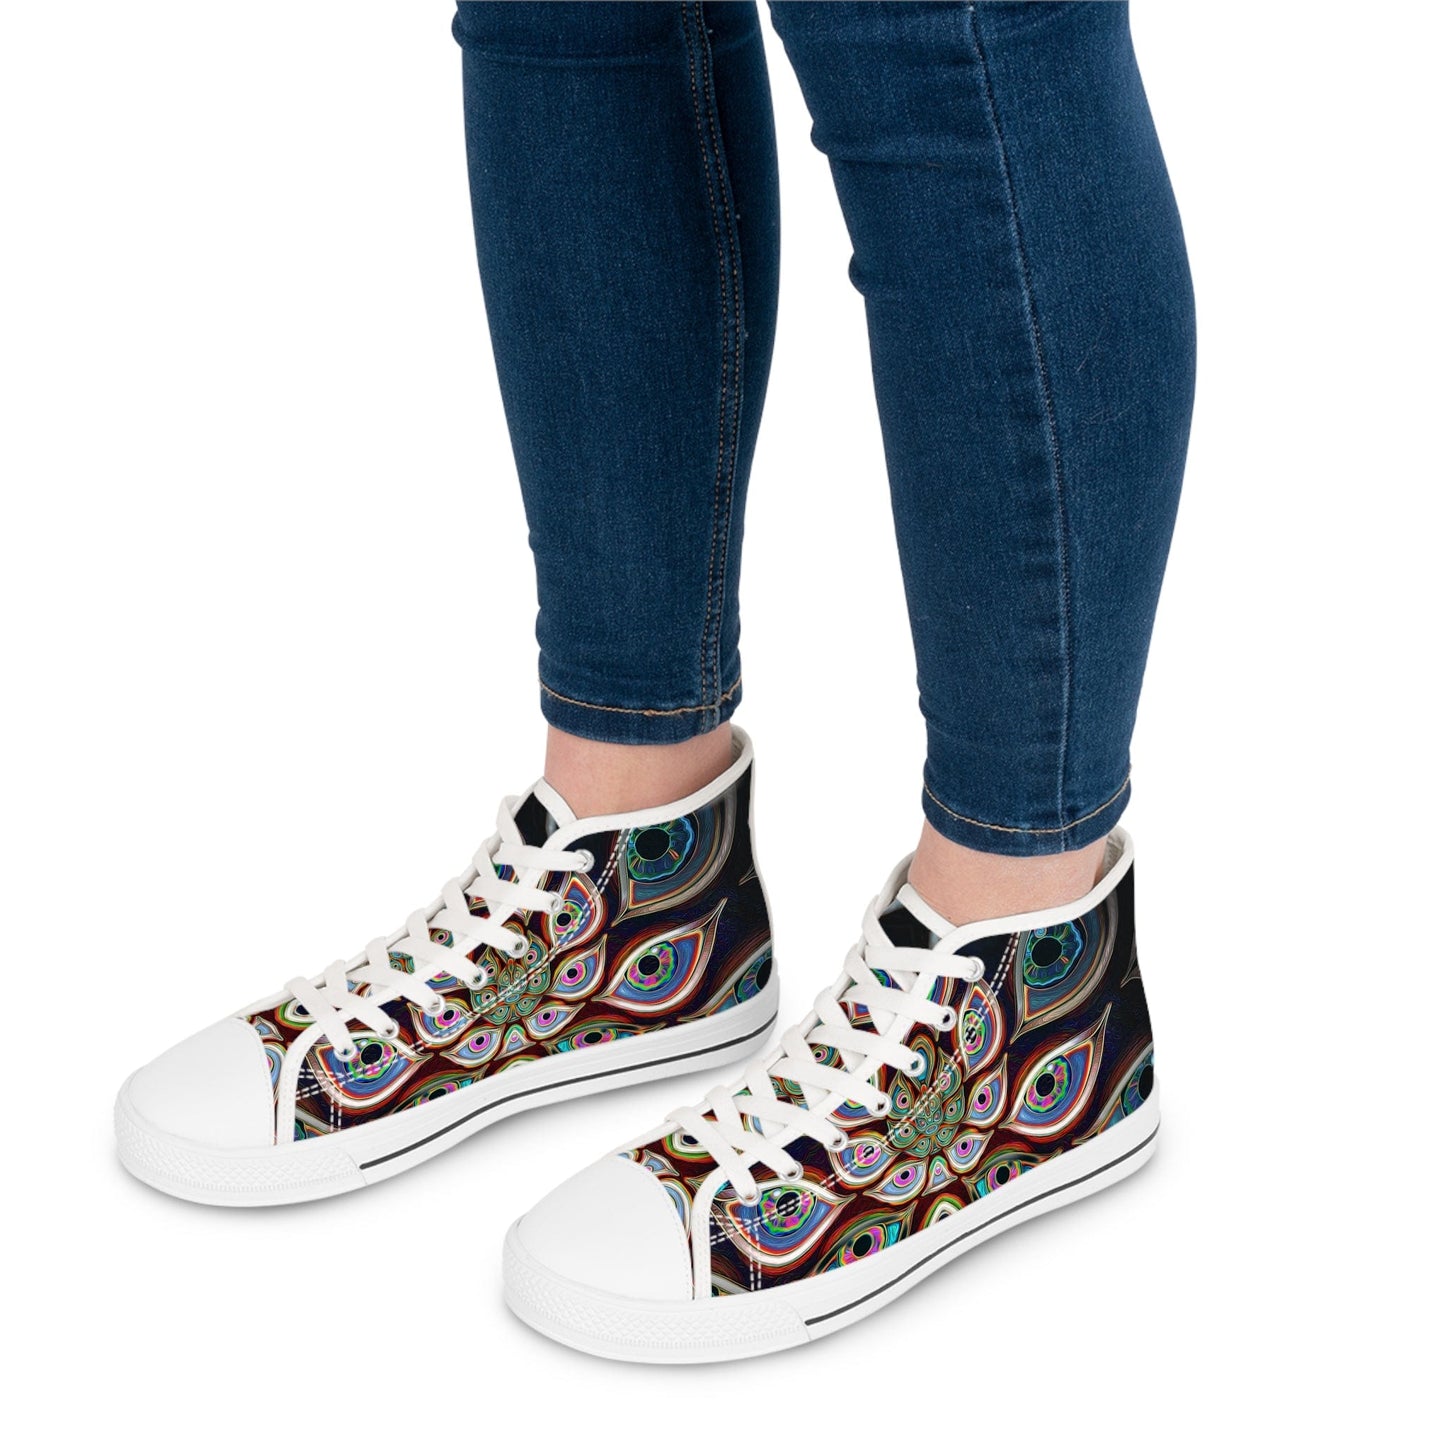 "The Waiting Room" WOMEN'S HIGHT TOP SNEAKERS